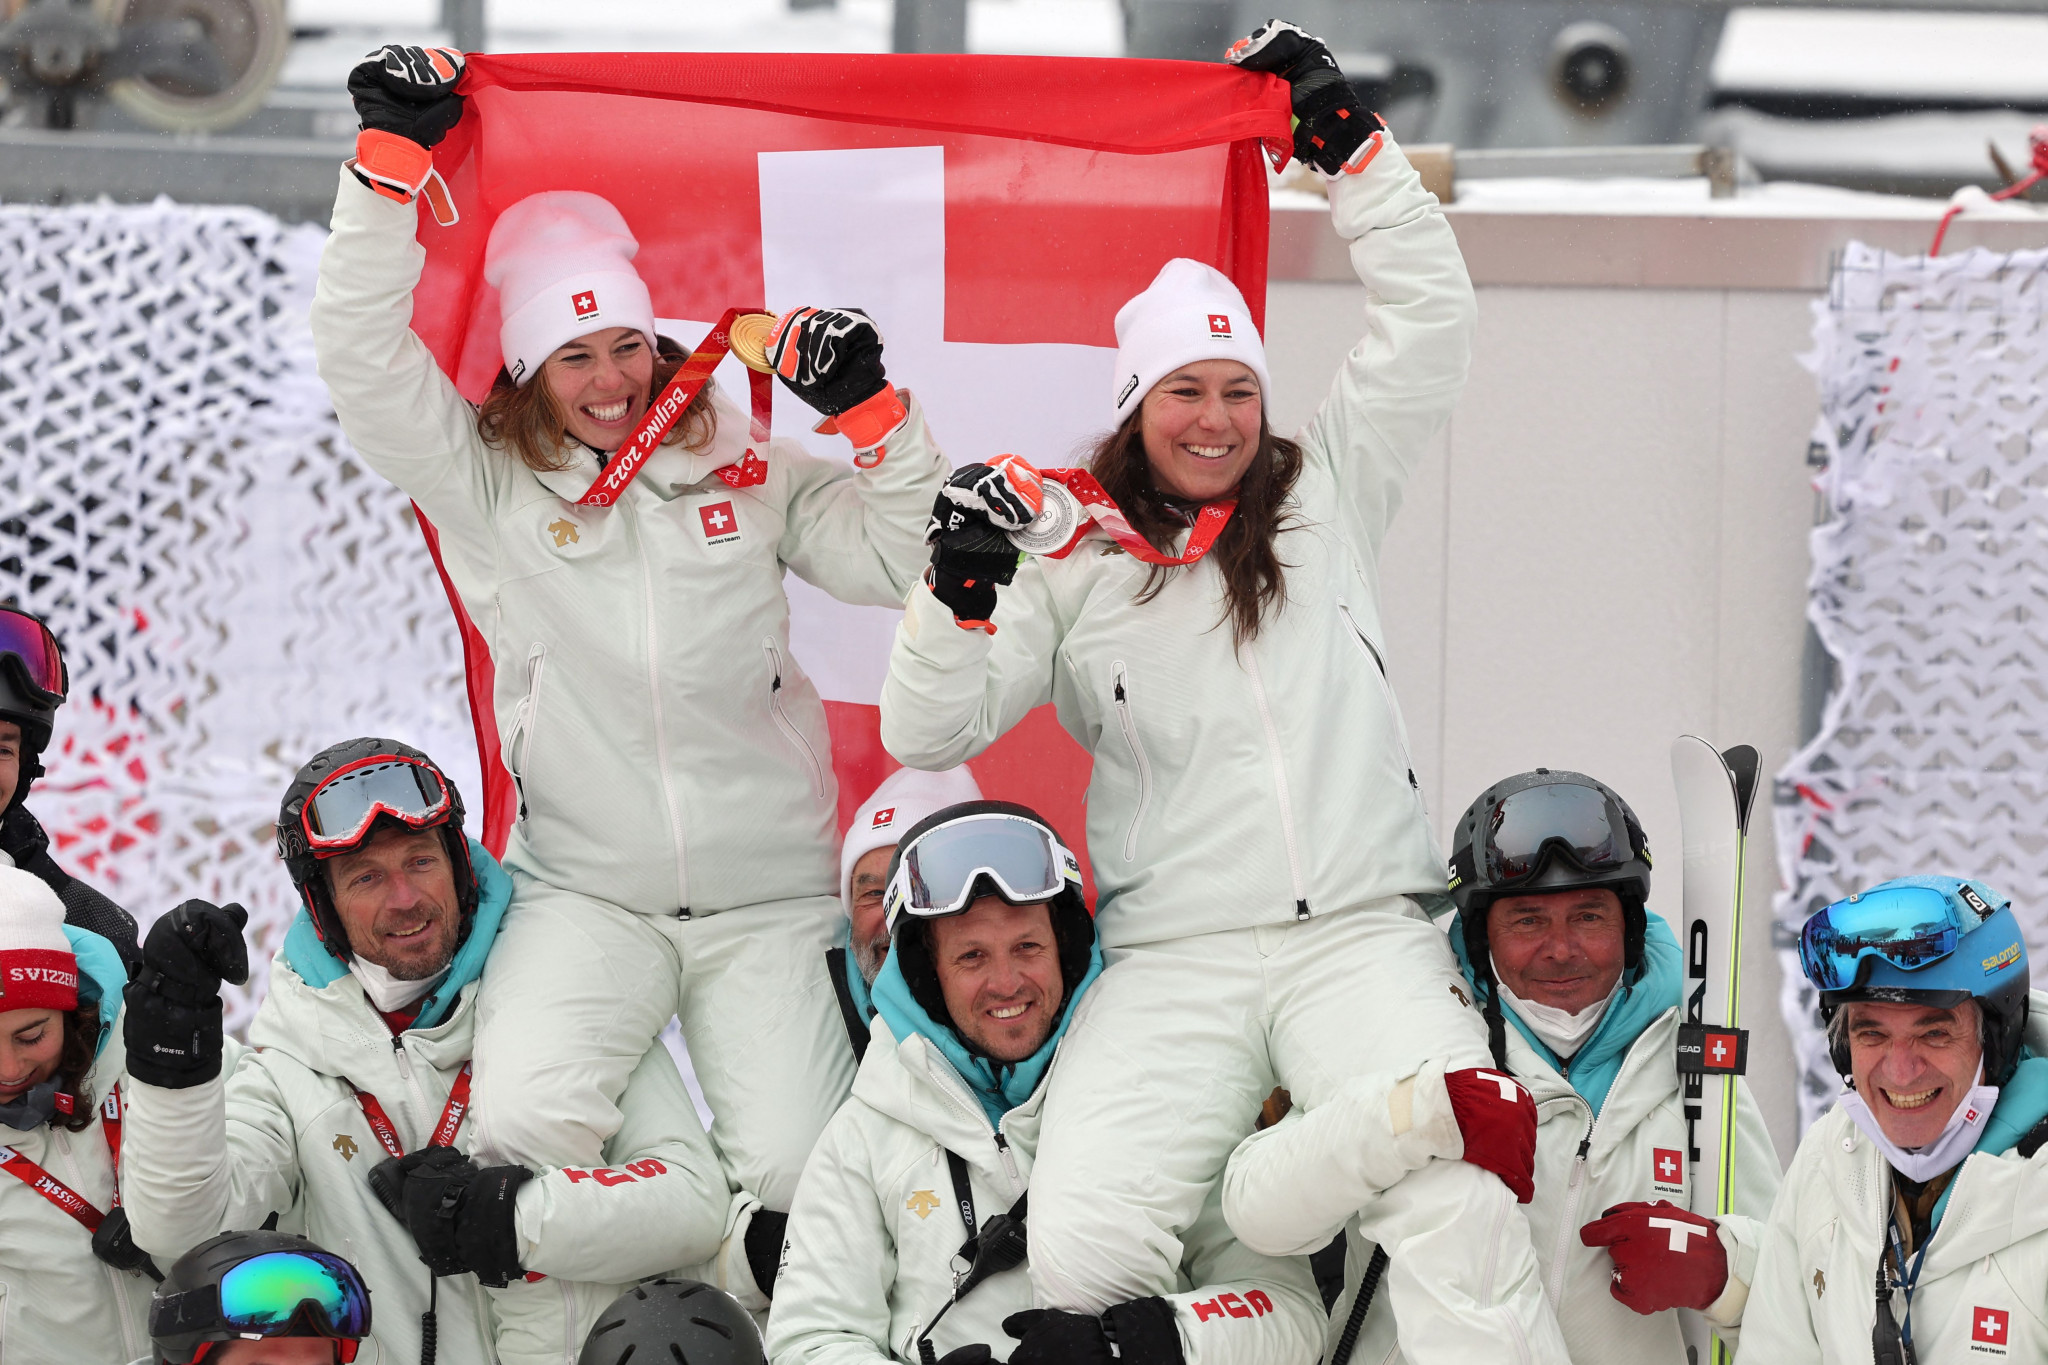 Switzerland celebrated a one-two in the women's Alpine combined event ©Getty Images